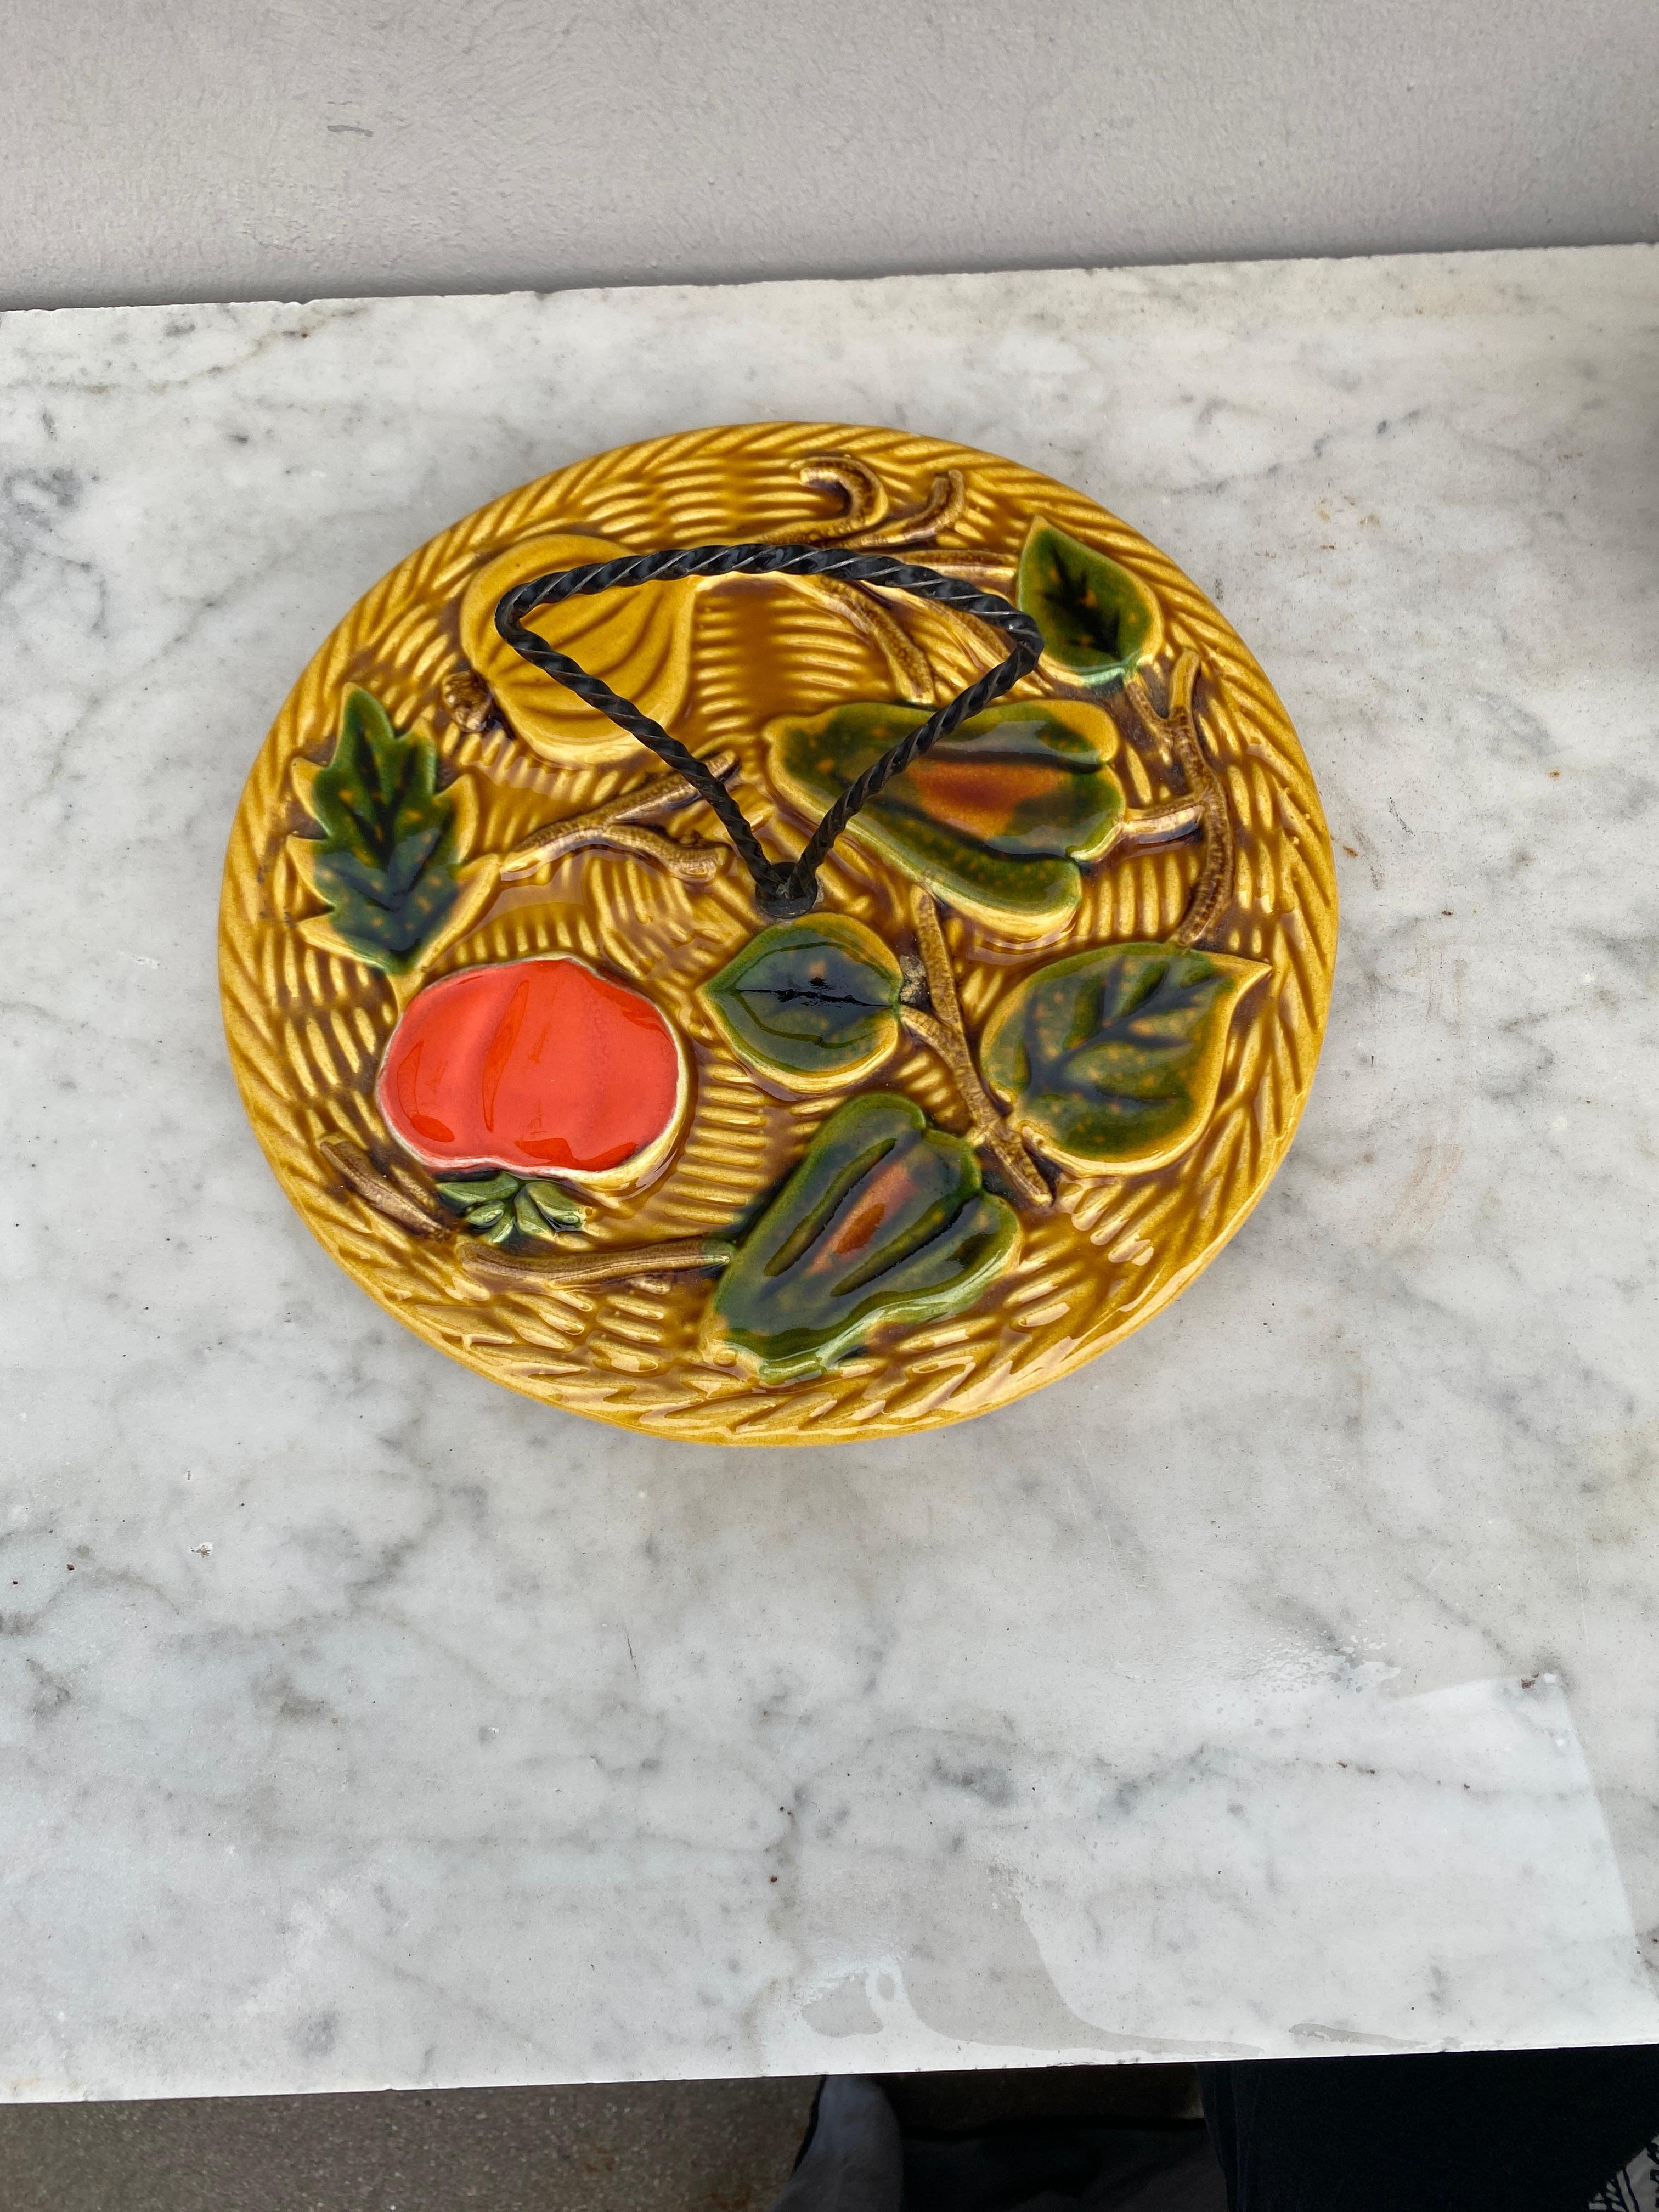 Mid-century French Majolica Cheese Platter Vallauris
Decorated with tomato,onion,pepper.